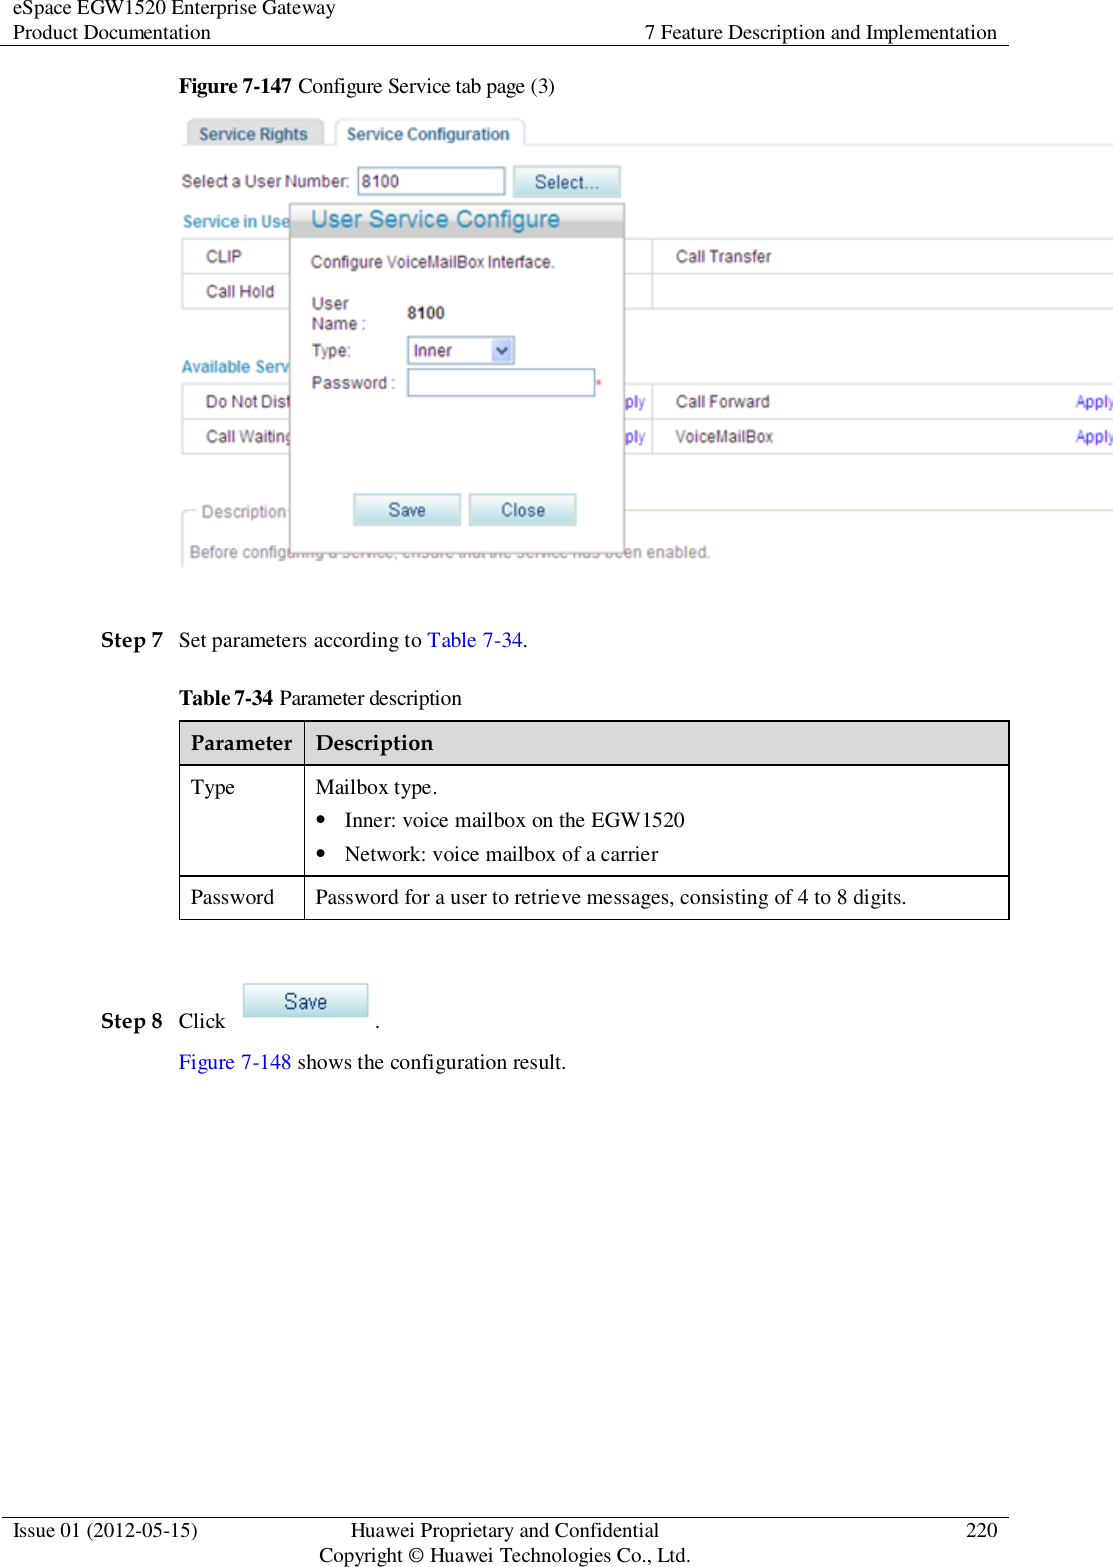 eSpace EGW1520 Enterprise Gateway Product Documentation 7 Feature Description and Implementation  Issue 01 (2012-05-15) Huawei Proprietary and Confidential                                     Copyright © Huawei Technologies Co., Ltd. 220  Figure 7-147 Configure Service tab page (3)   Step 7 Set parameters according to Table 7-34. Table 7-34 Parameter description Parameter Description Type Mailbox type.  Inner: voice mailbox on the EGW1520  Network: voice mailbox of a carrier Password Password for a user to retrieve messages, consisting of 4 to 8 digits.  Step 8 Click  . Figure 7-148 shows the configuration result. 